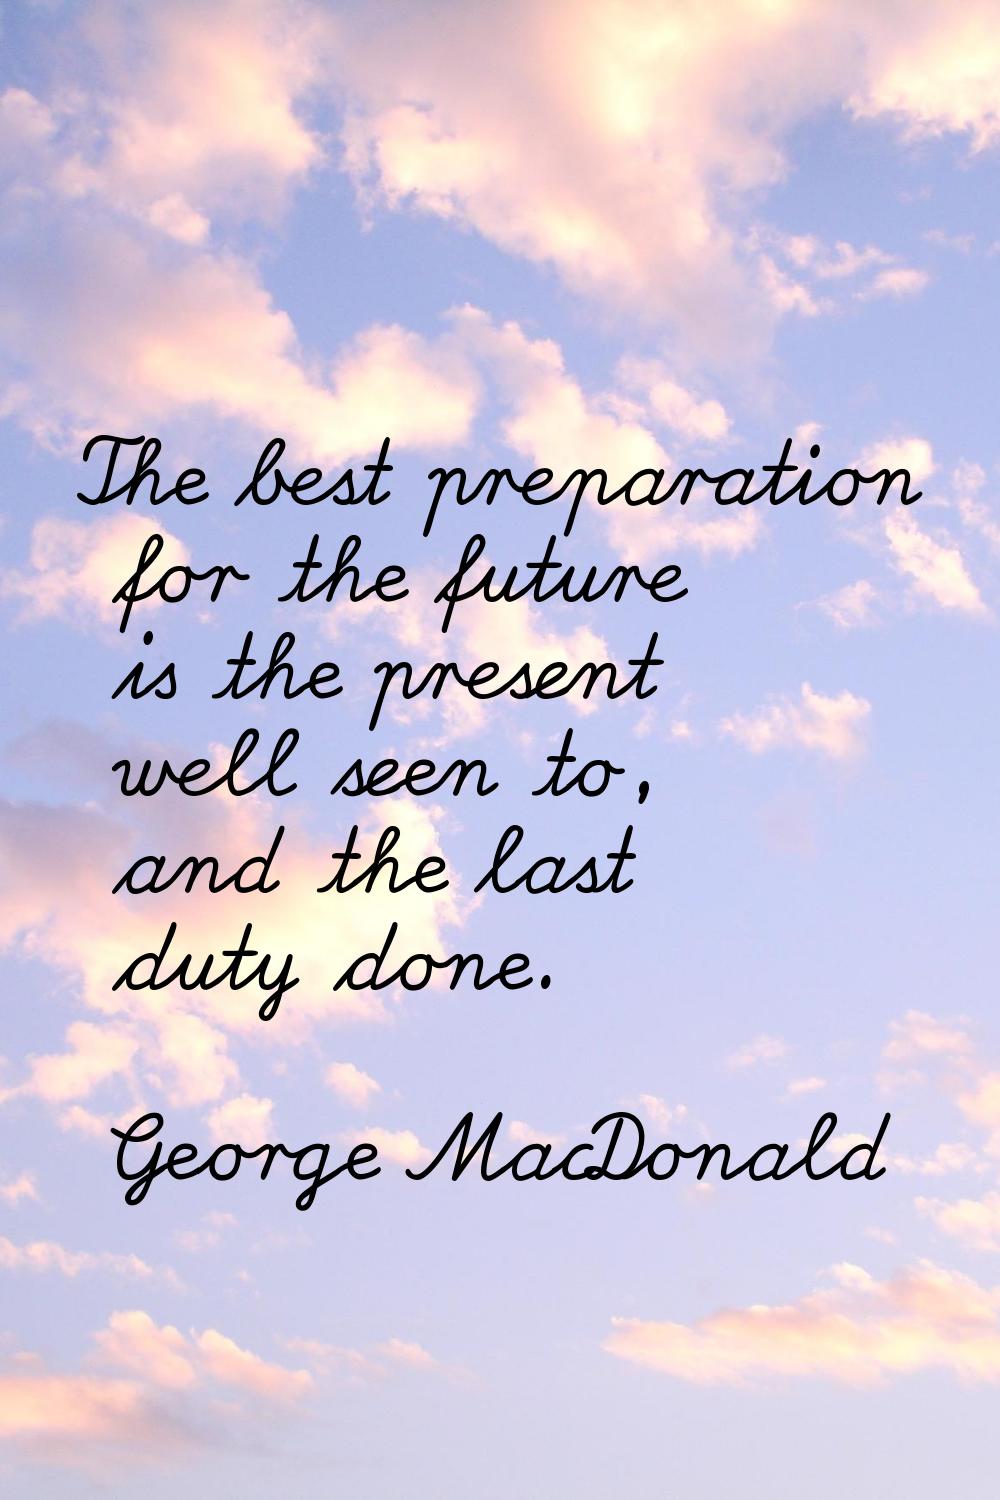 The best preparation for the future is the present well seen to, and the last duty done.